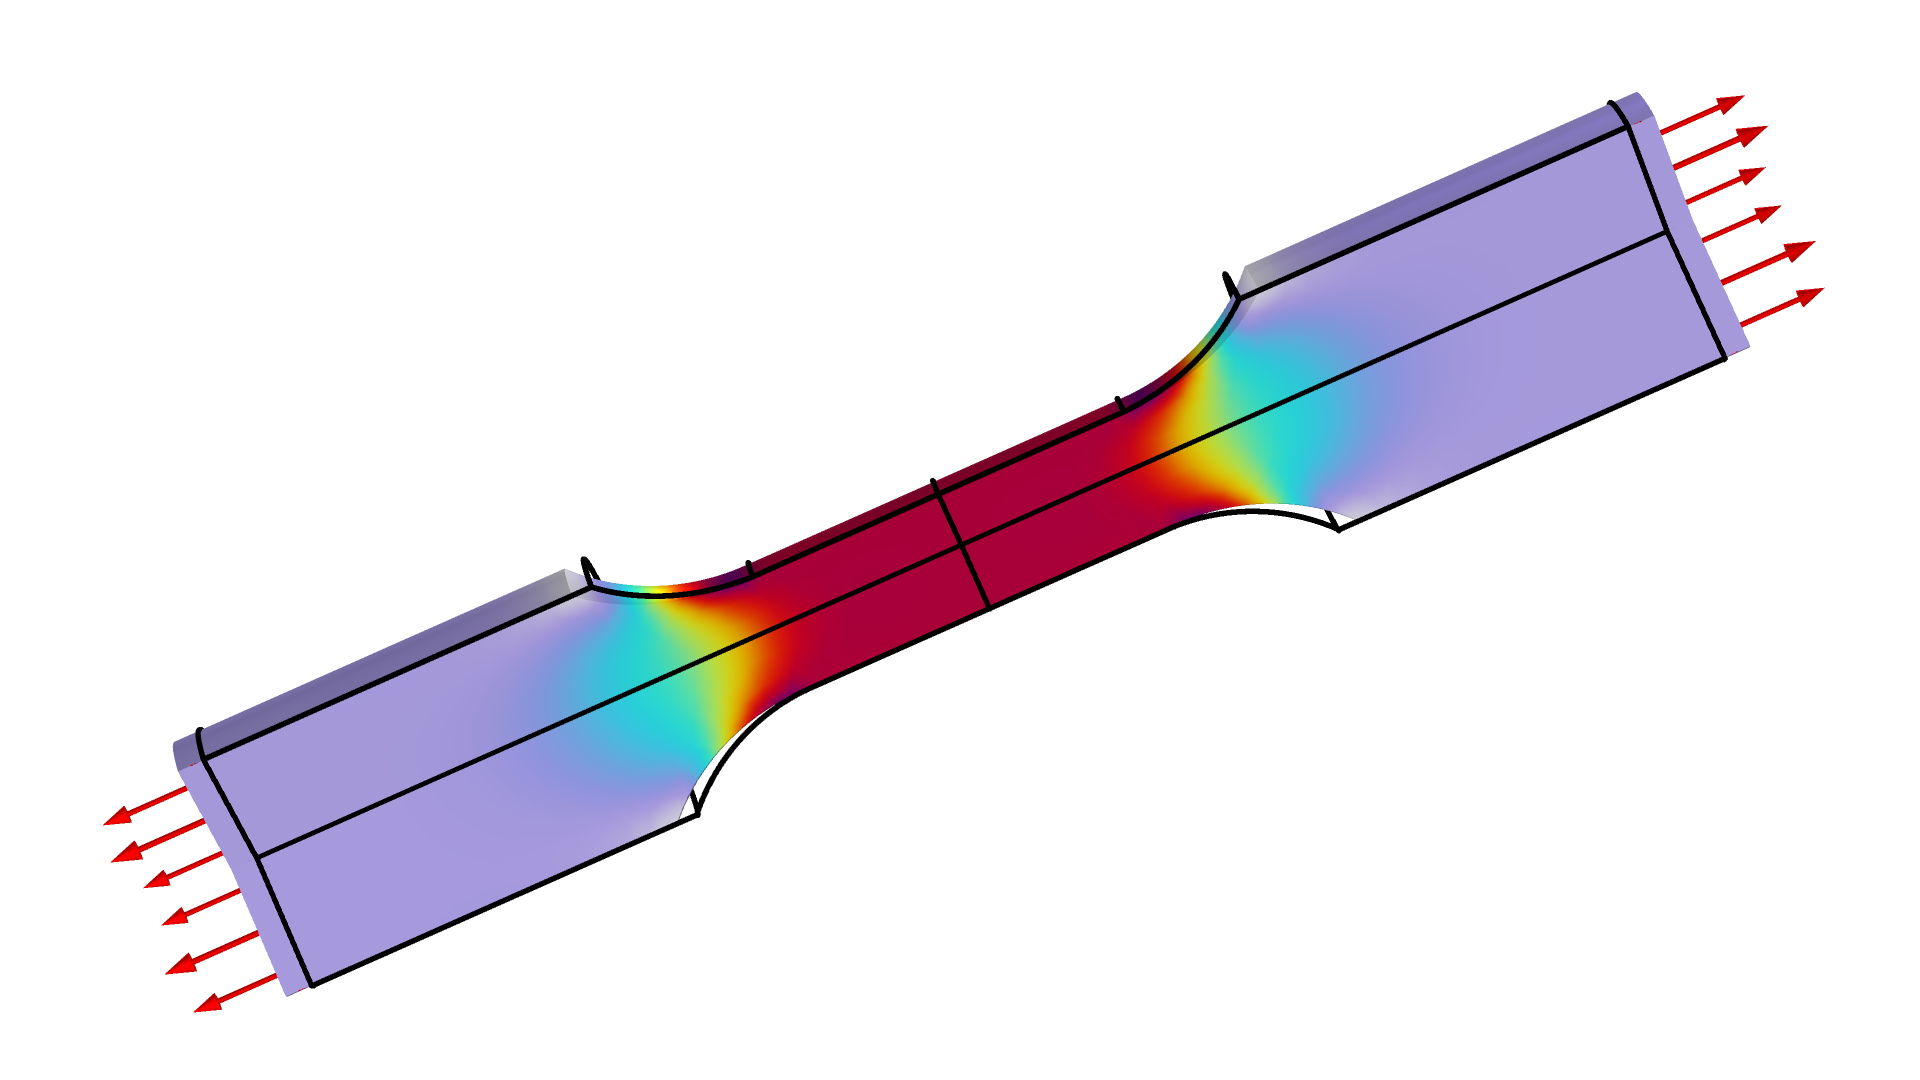 A model showing the stress for a tensile test, with the ends being purple and having arrows pointing outward and the center being red.